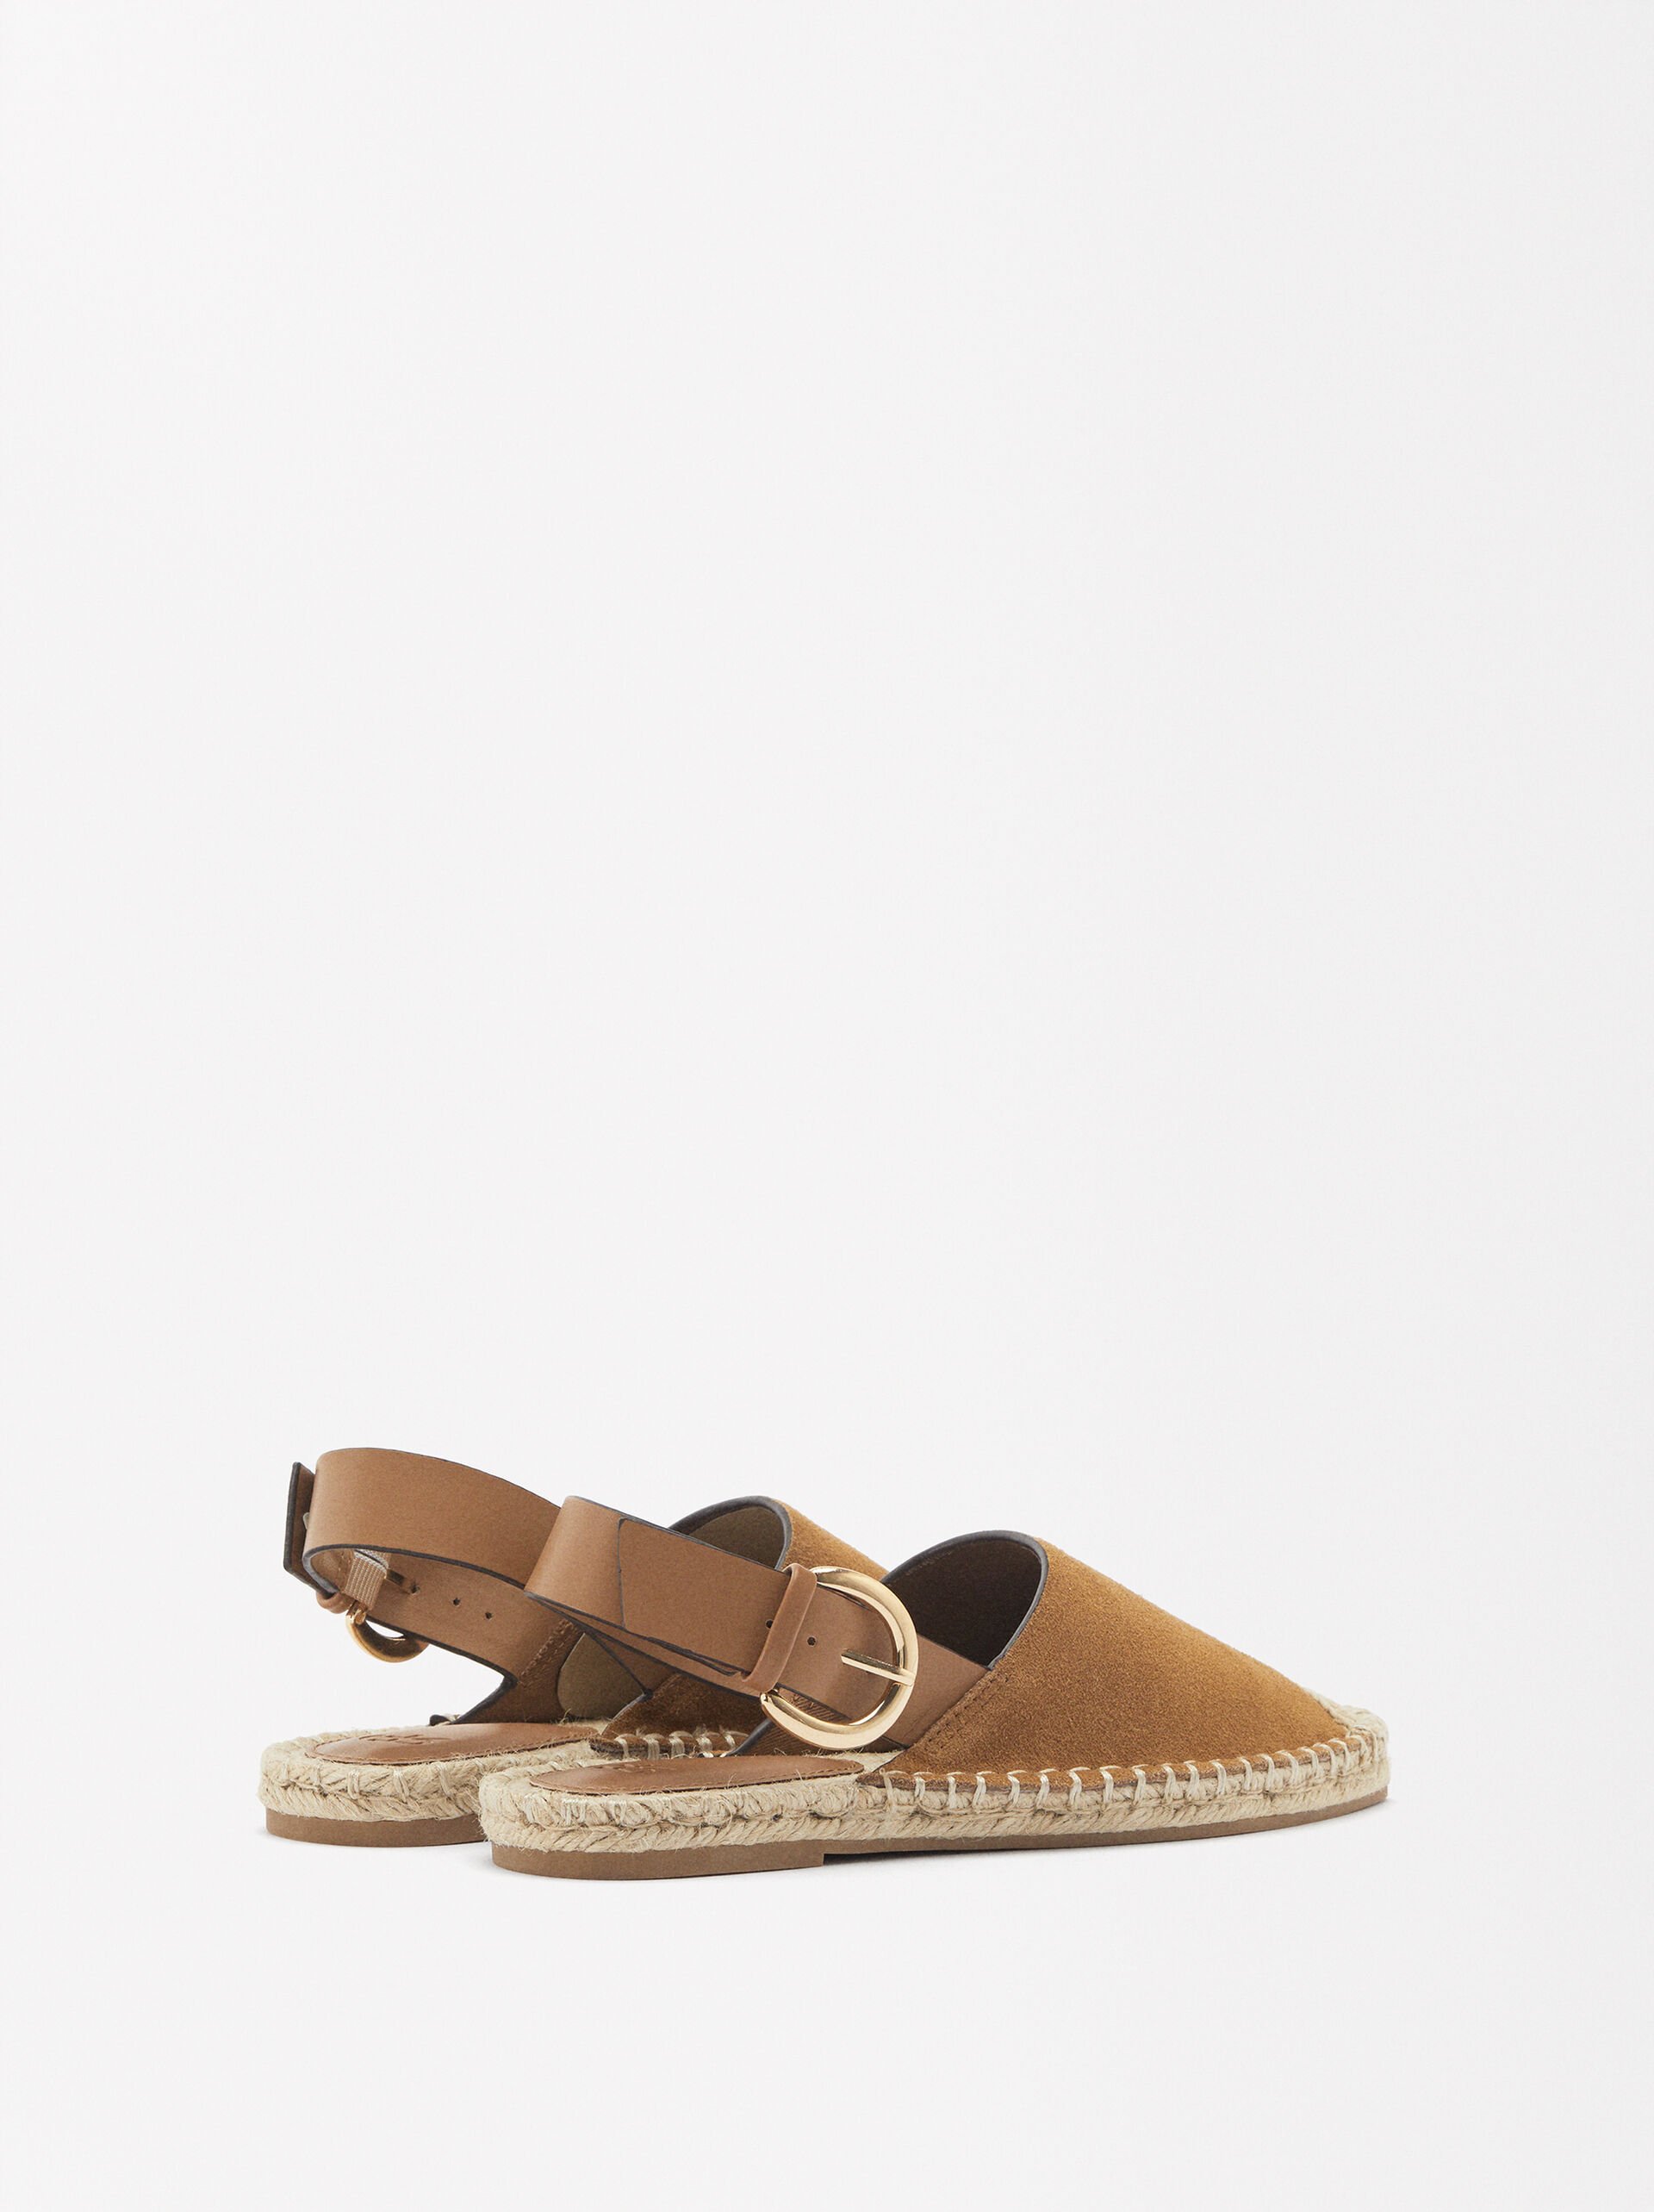 Leather And Jute Espadrilles image number 4.0